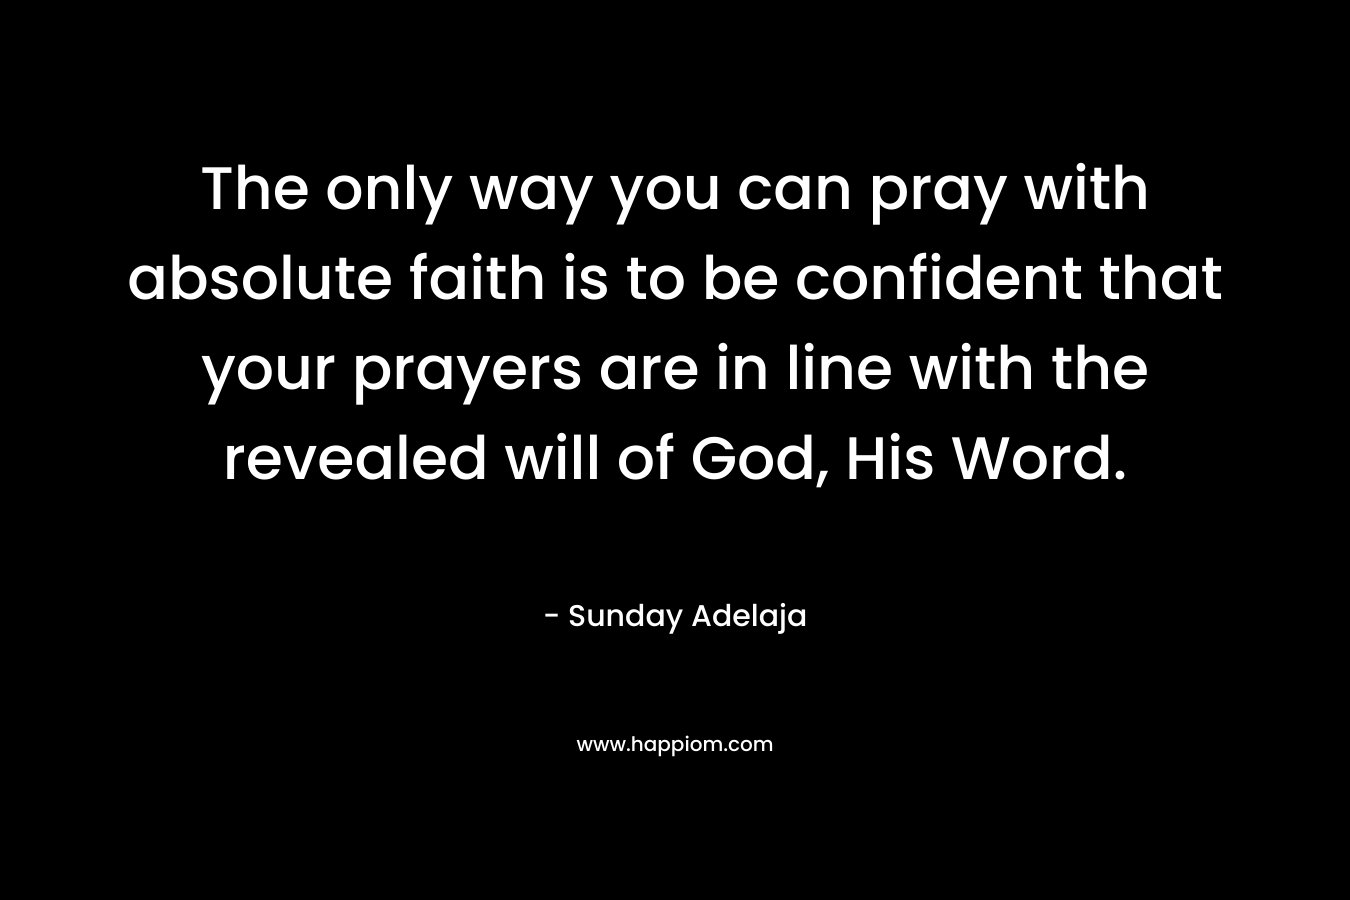 The only way you can pray with absolute faith is to be confident that your prayers are in line with the revealed will of God, His Word.